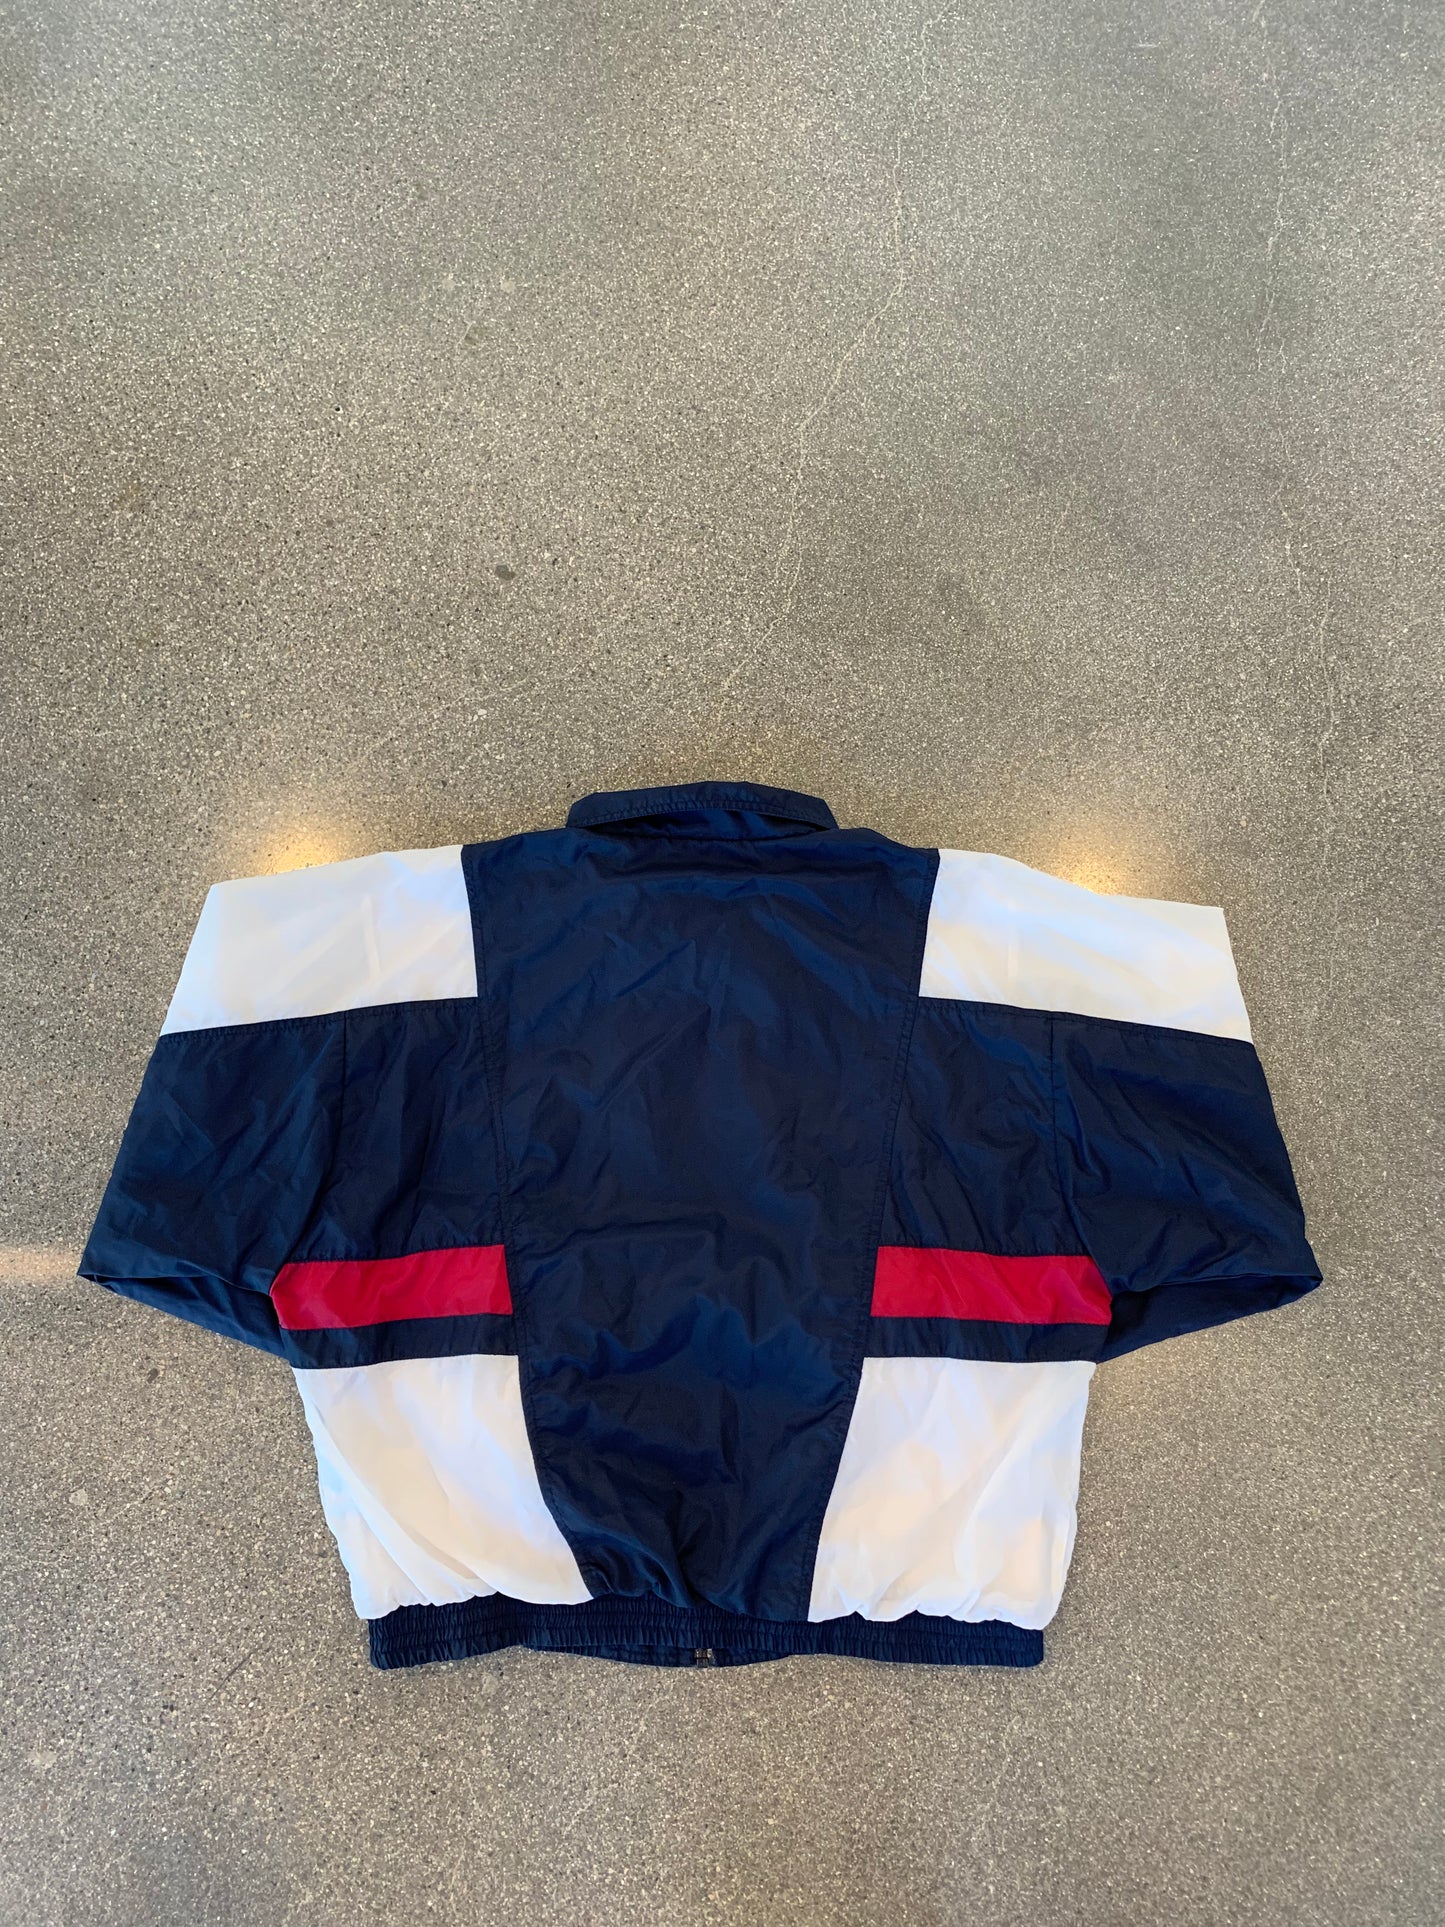 Reebok Navy and Red Jacket